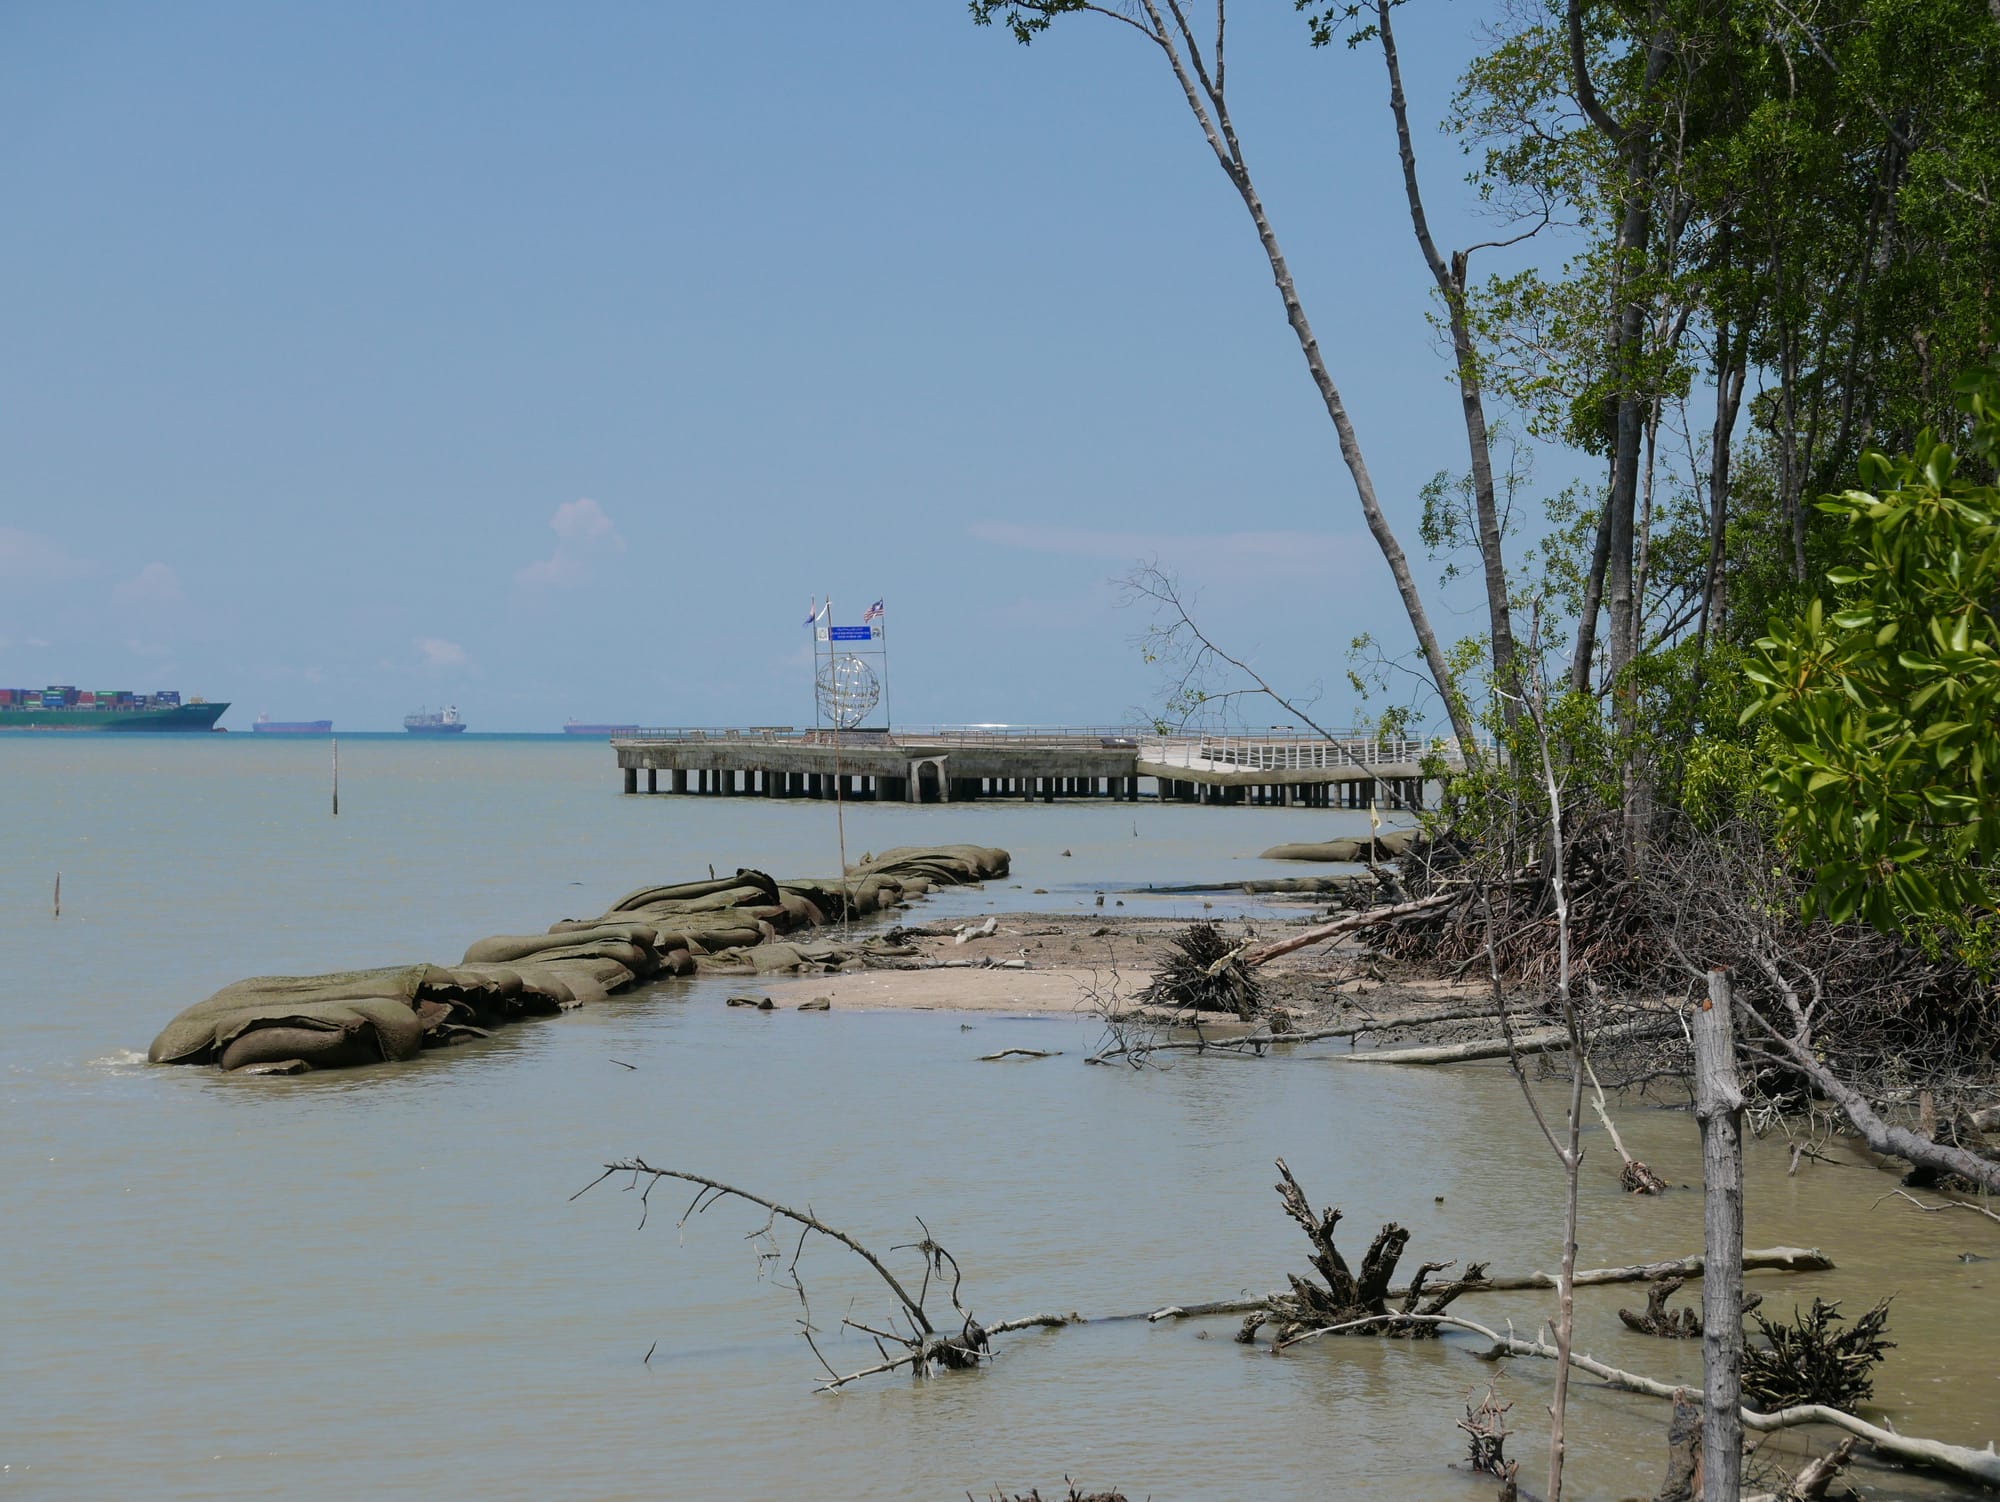 Photo by Author — the most southerly point of mainland Asia with a collapsed walkway — Tanjung Piai National Park